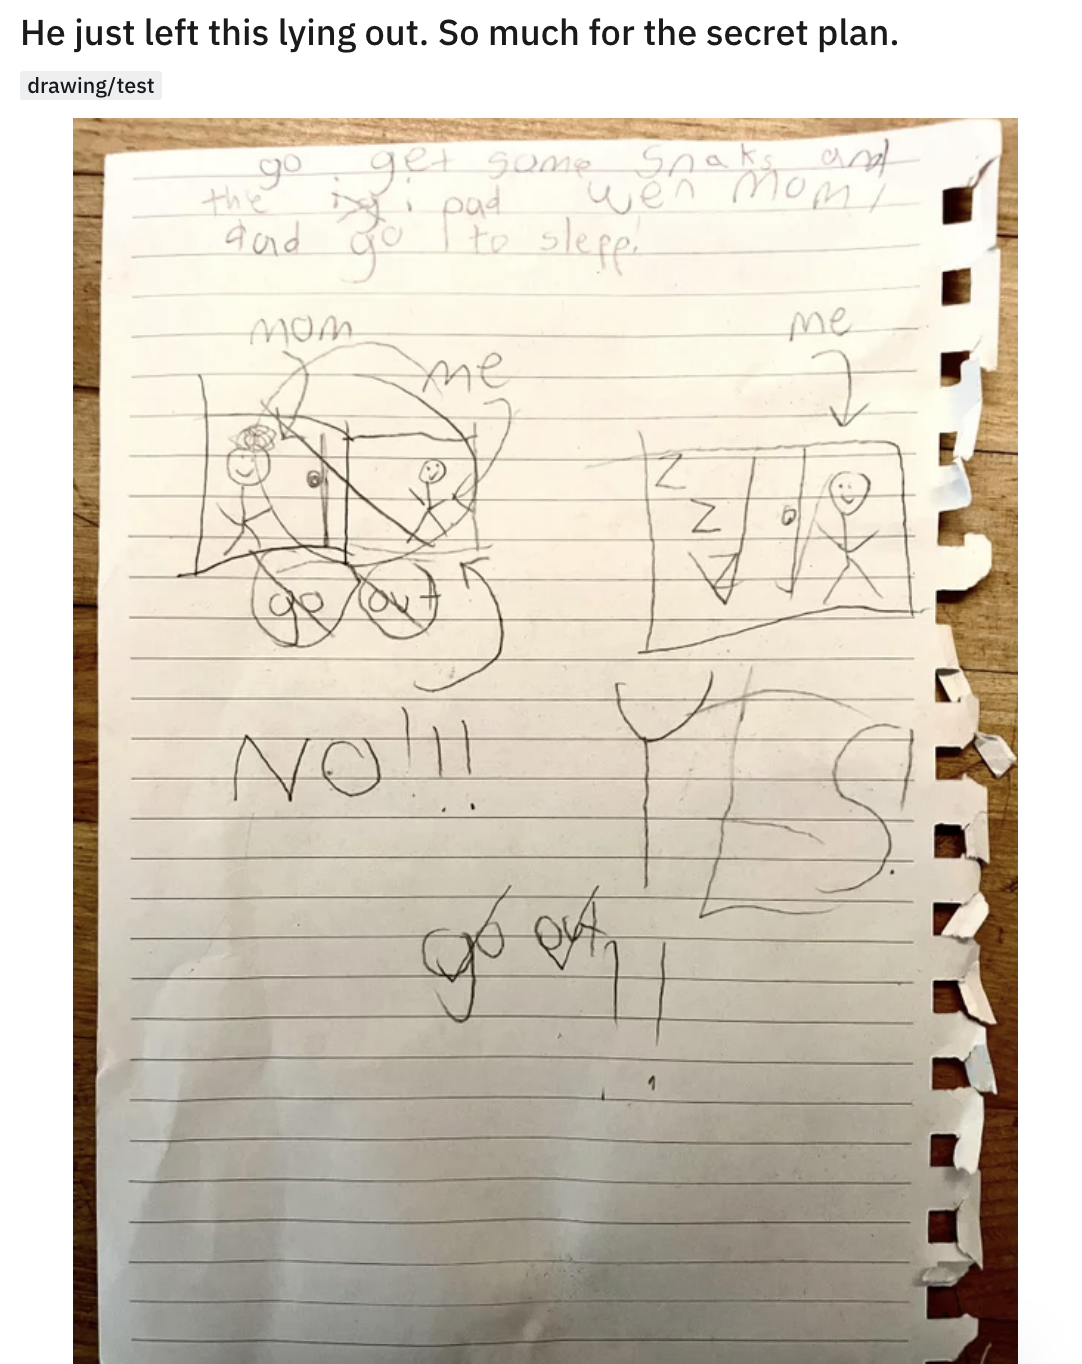 kid&#x27;s drawing of a plan of getting their iPad out when the parents are sleeping